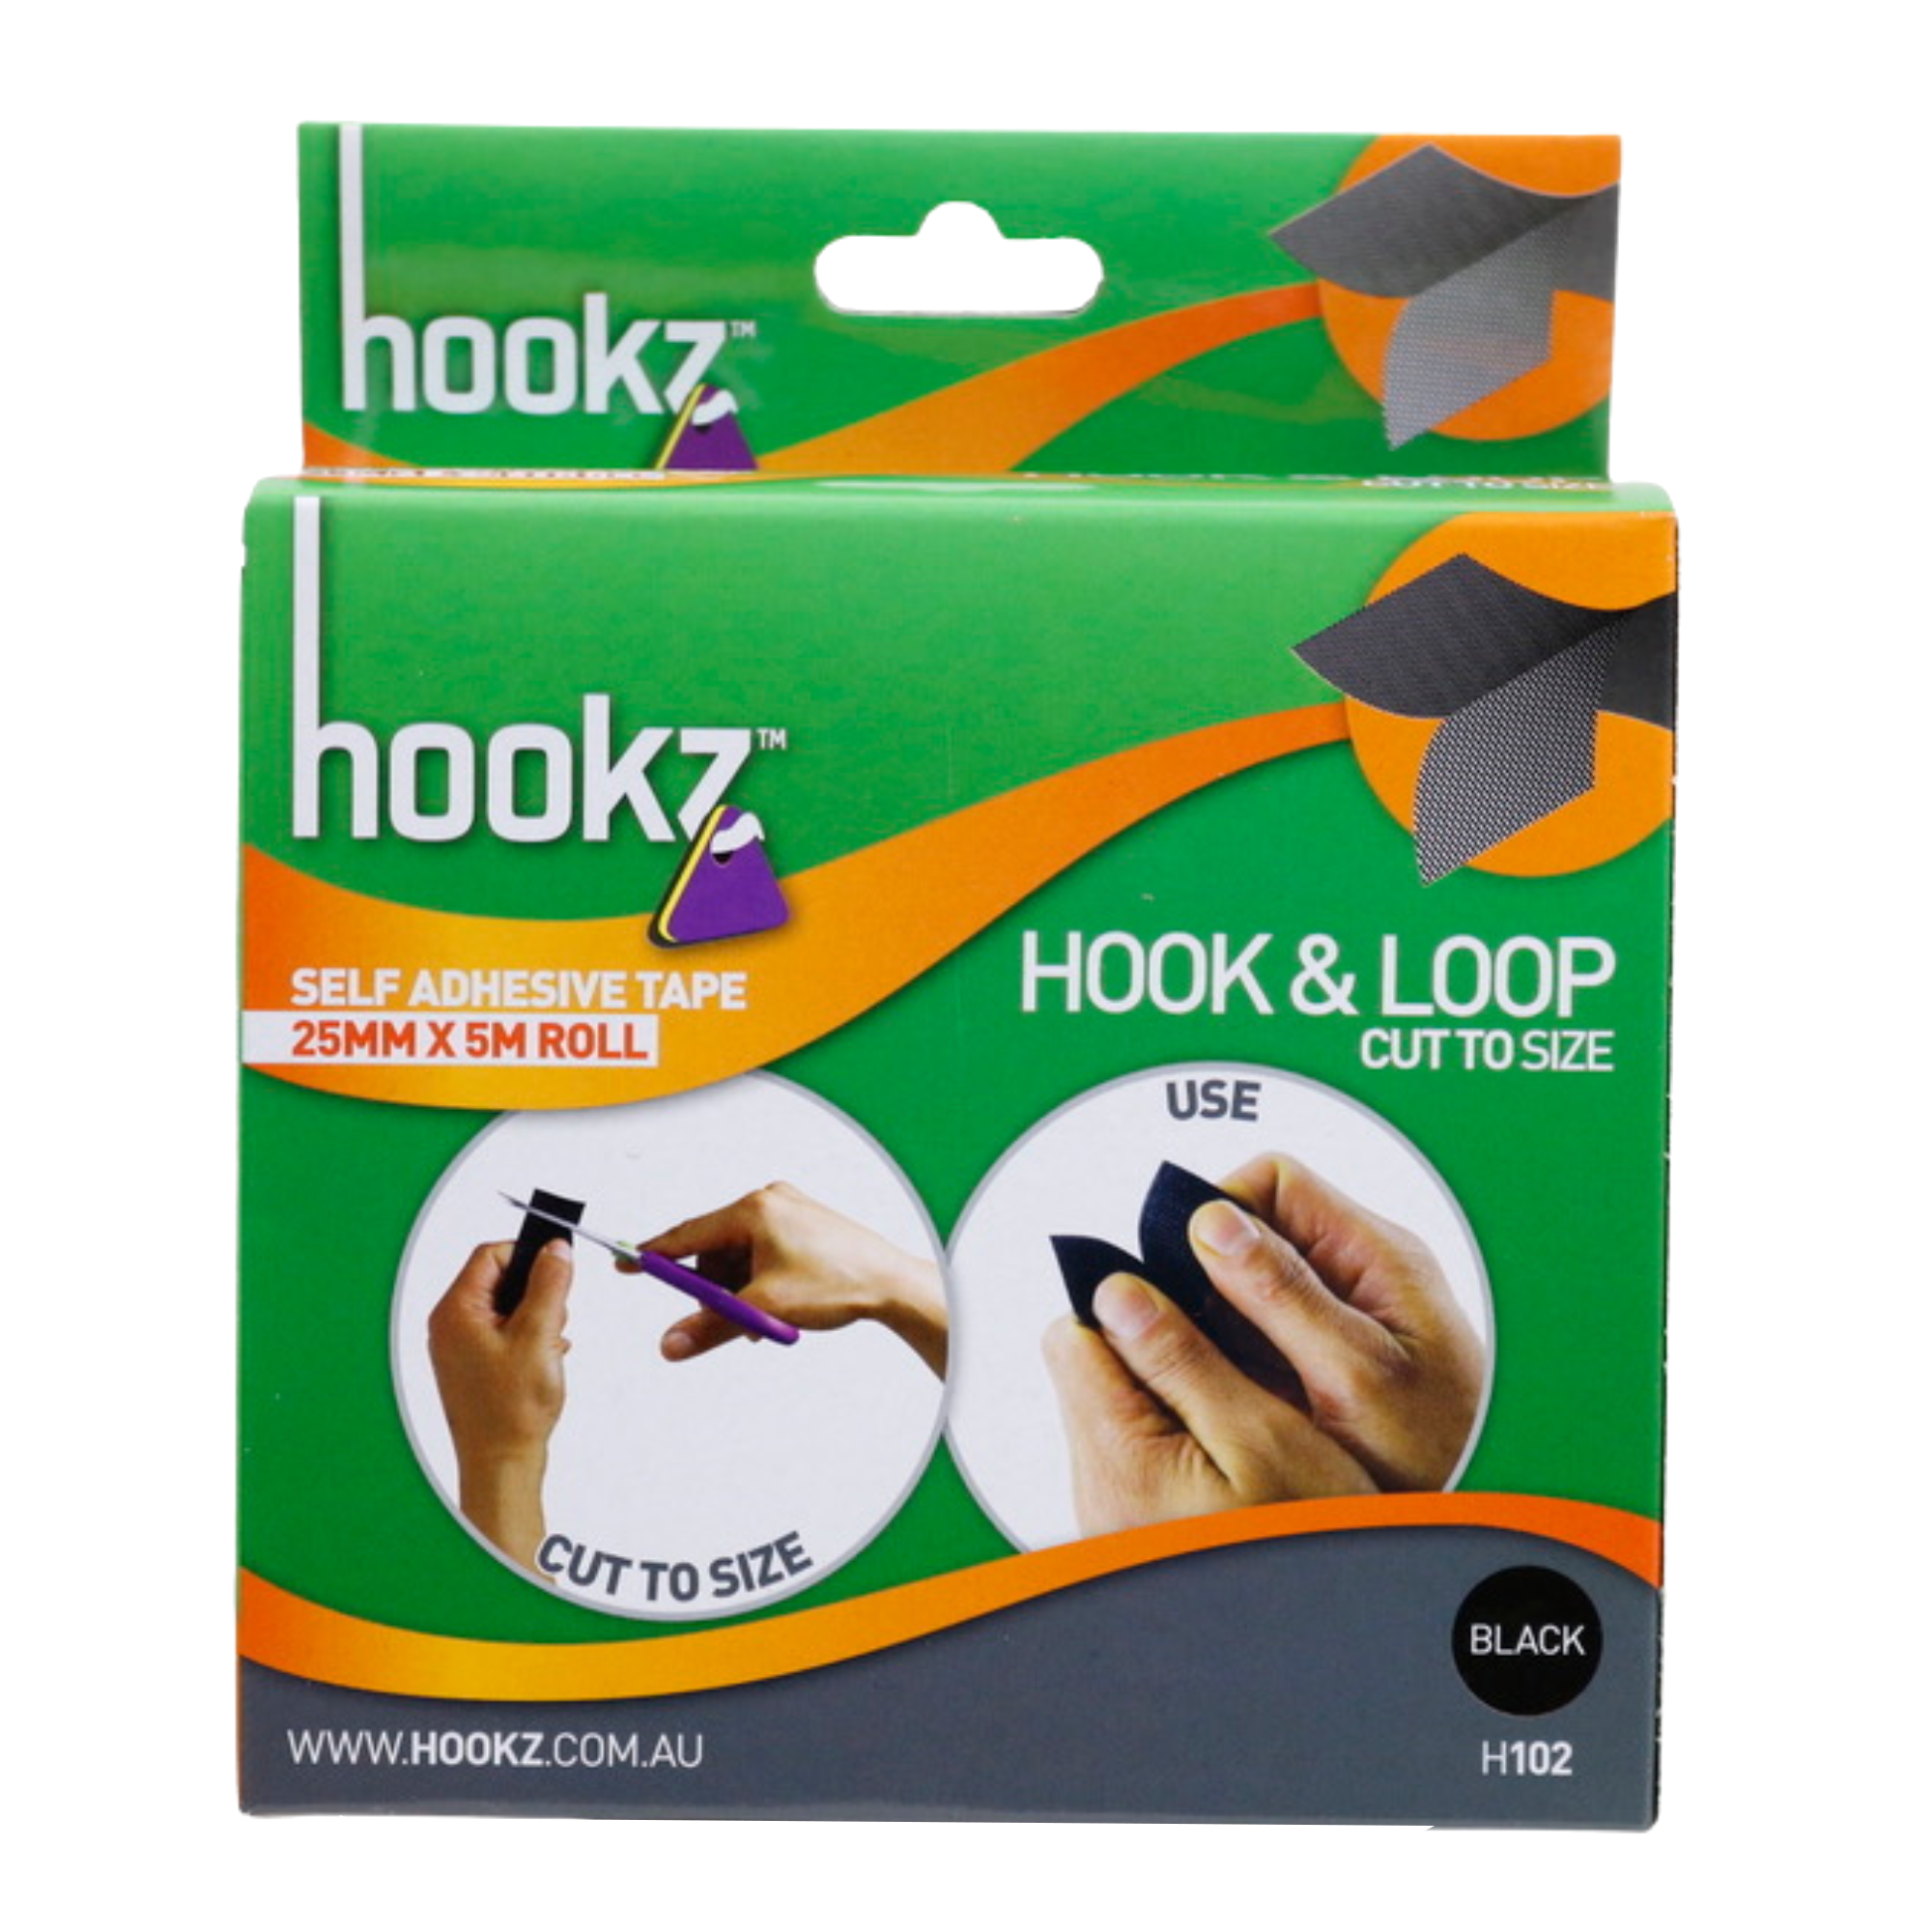 Hook & Loop Tape 5m Roll - Hookz permanent and removable hanging solutions